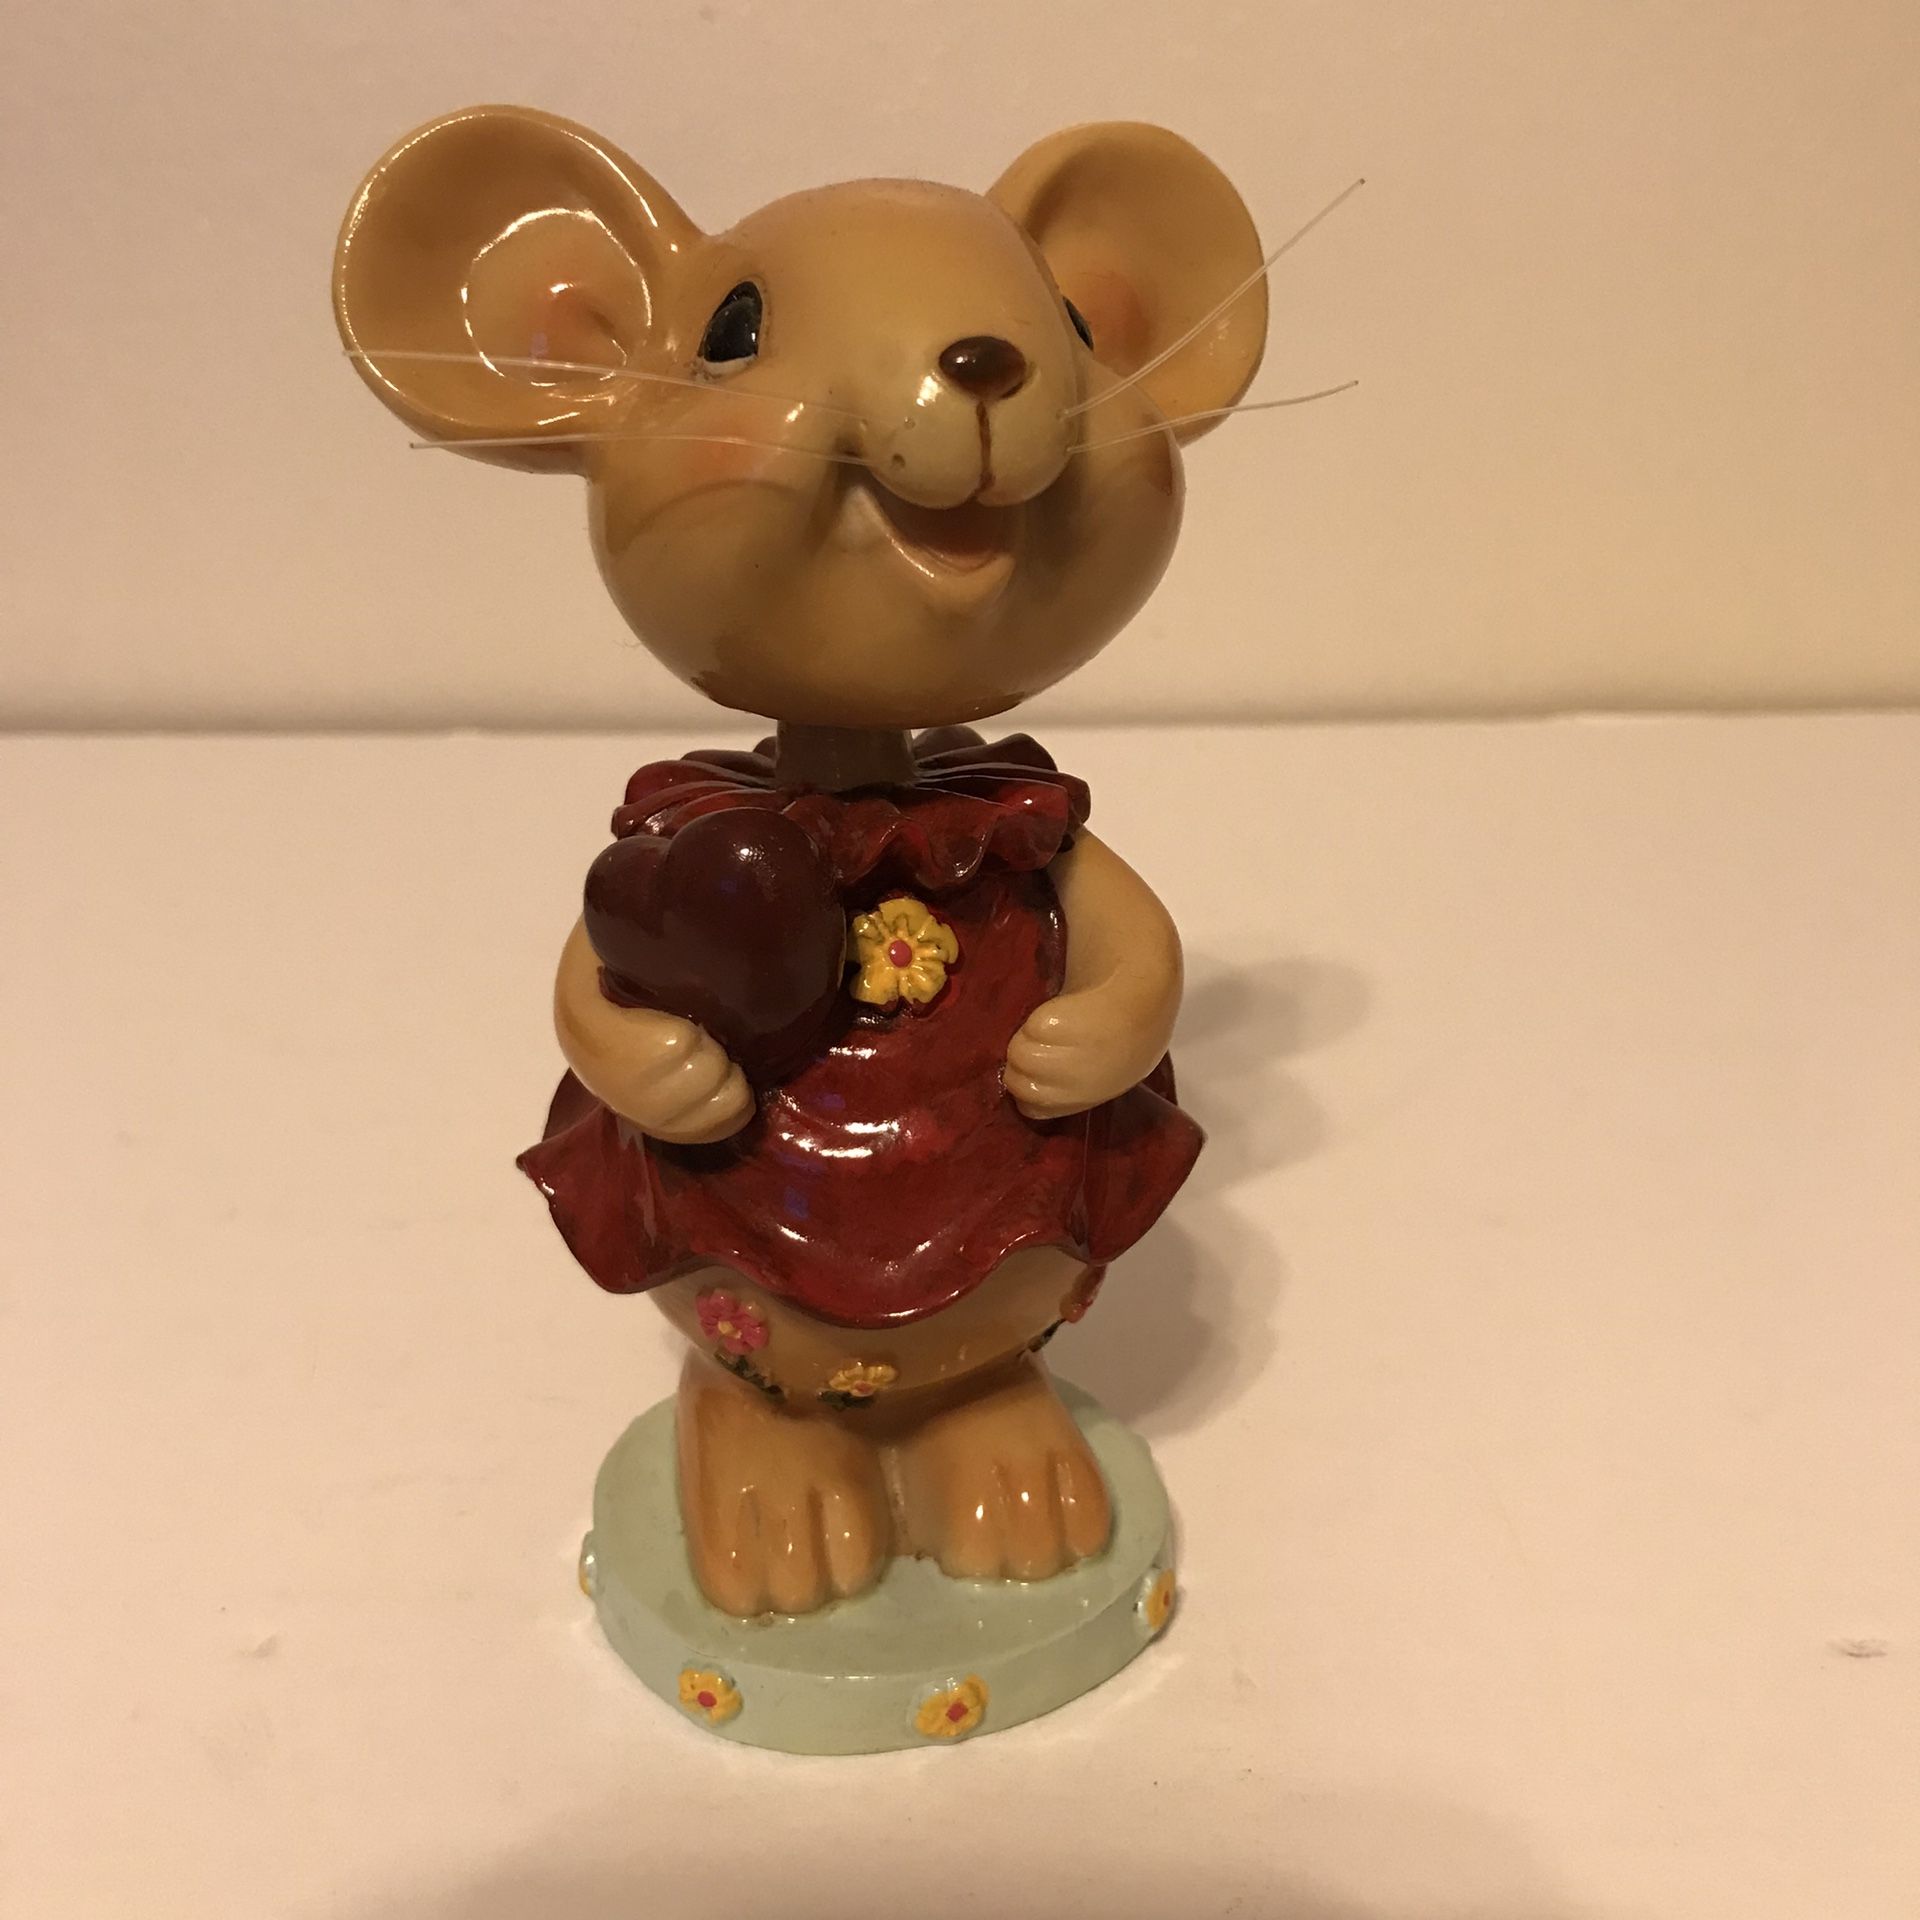 Vintage 5 3/4” Tall Floral Female Mouse Bobblehead Holding a Heart